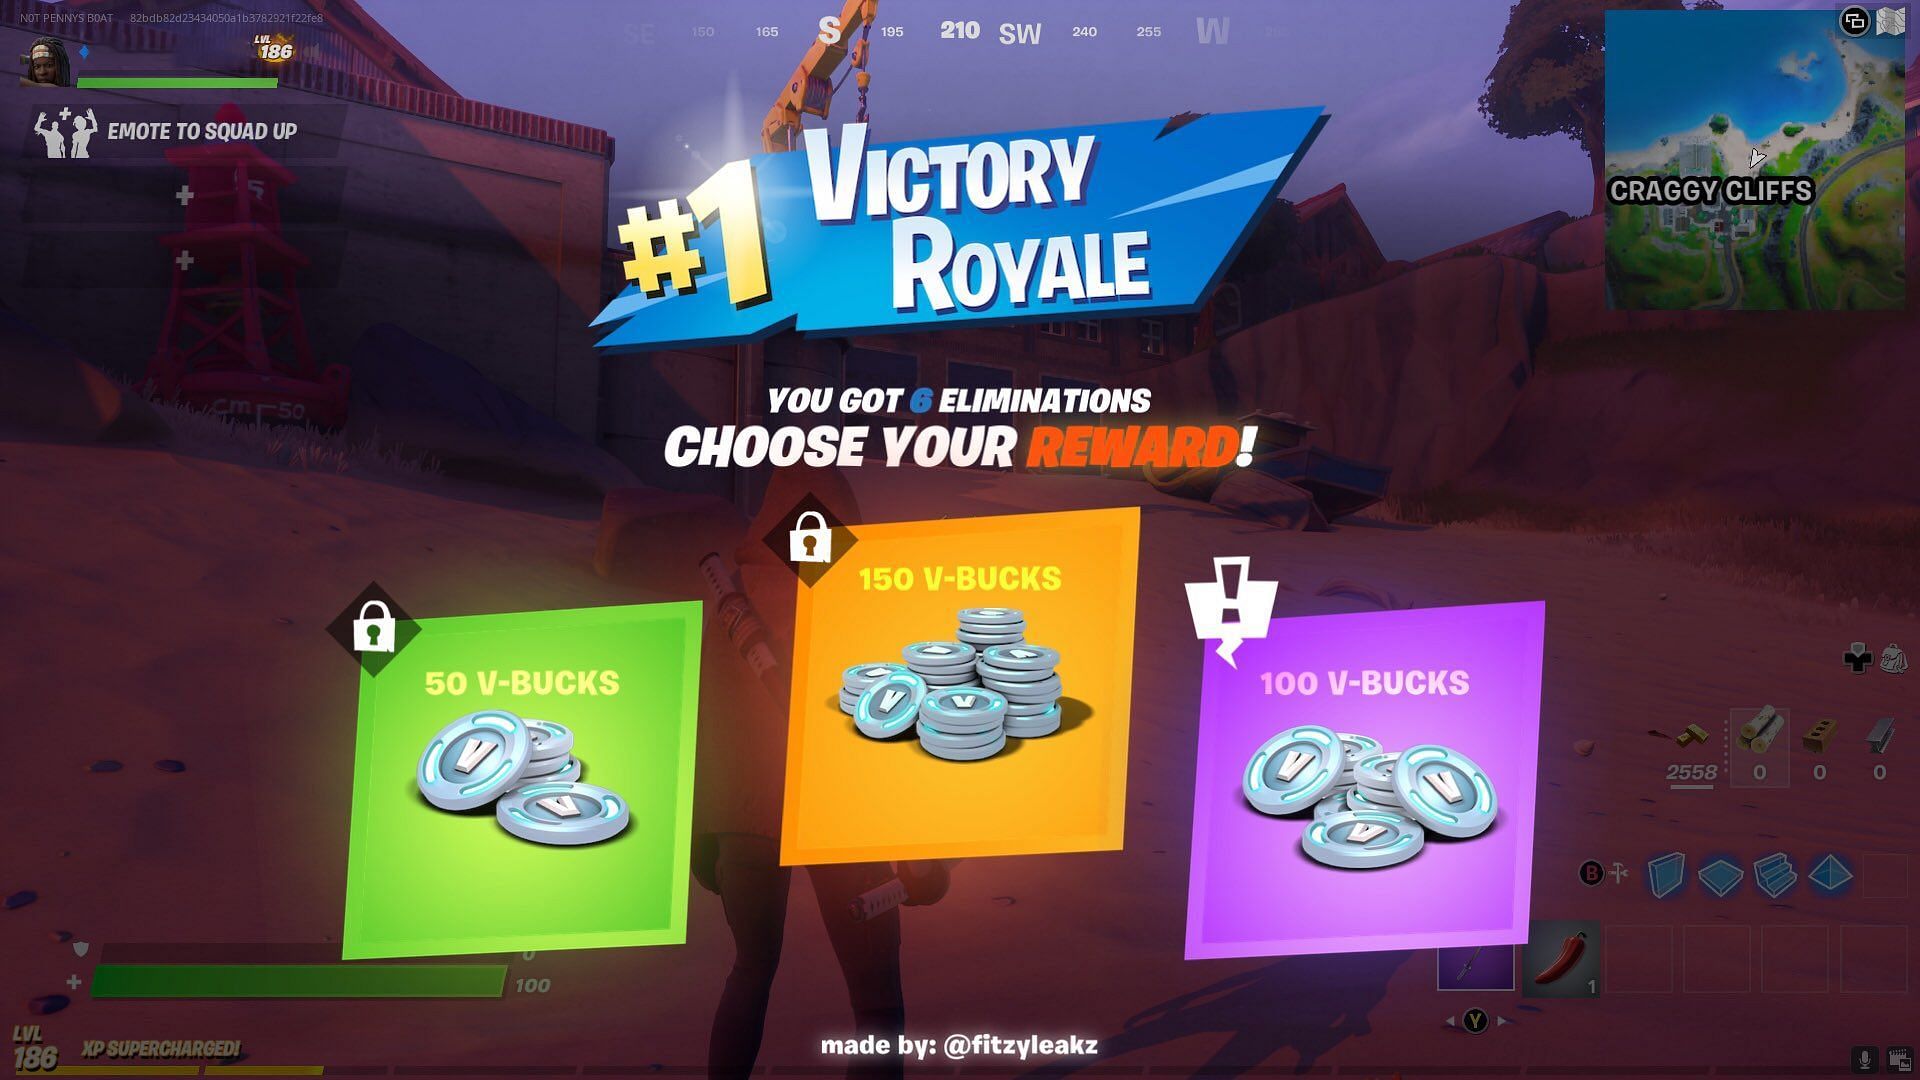 A concept showing how free V-Bucks in Fortnite can be possible (Image via Fitzy Leakz Twitter)